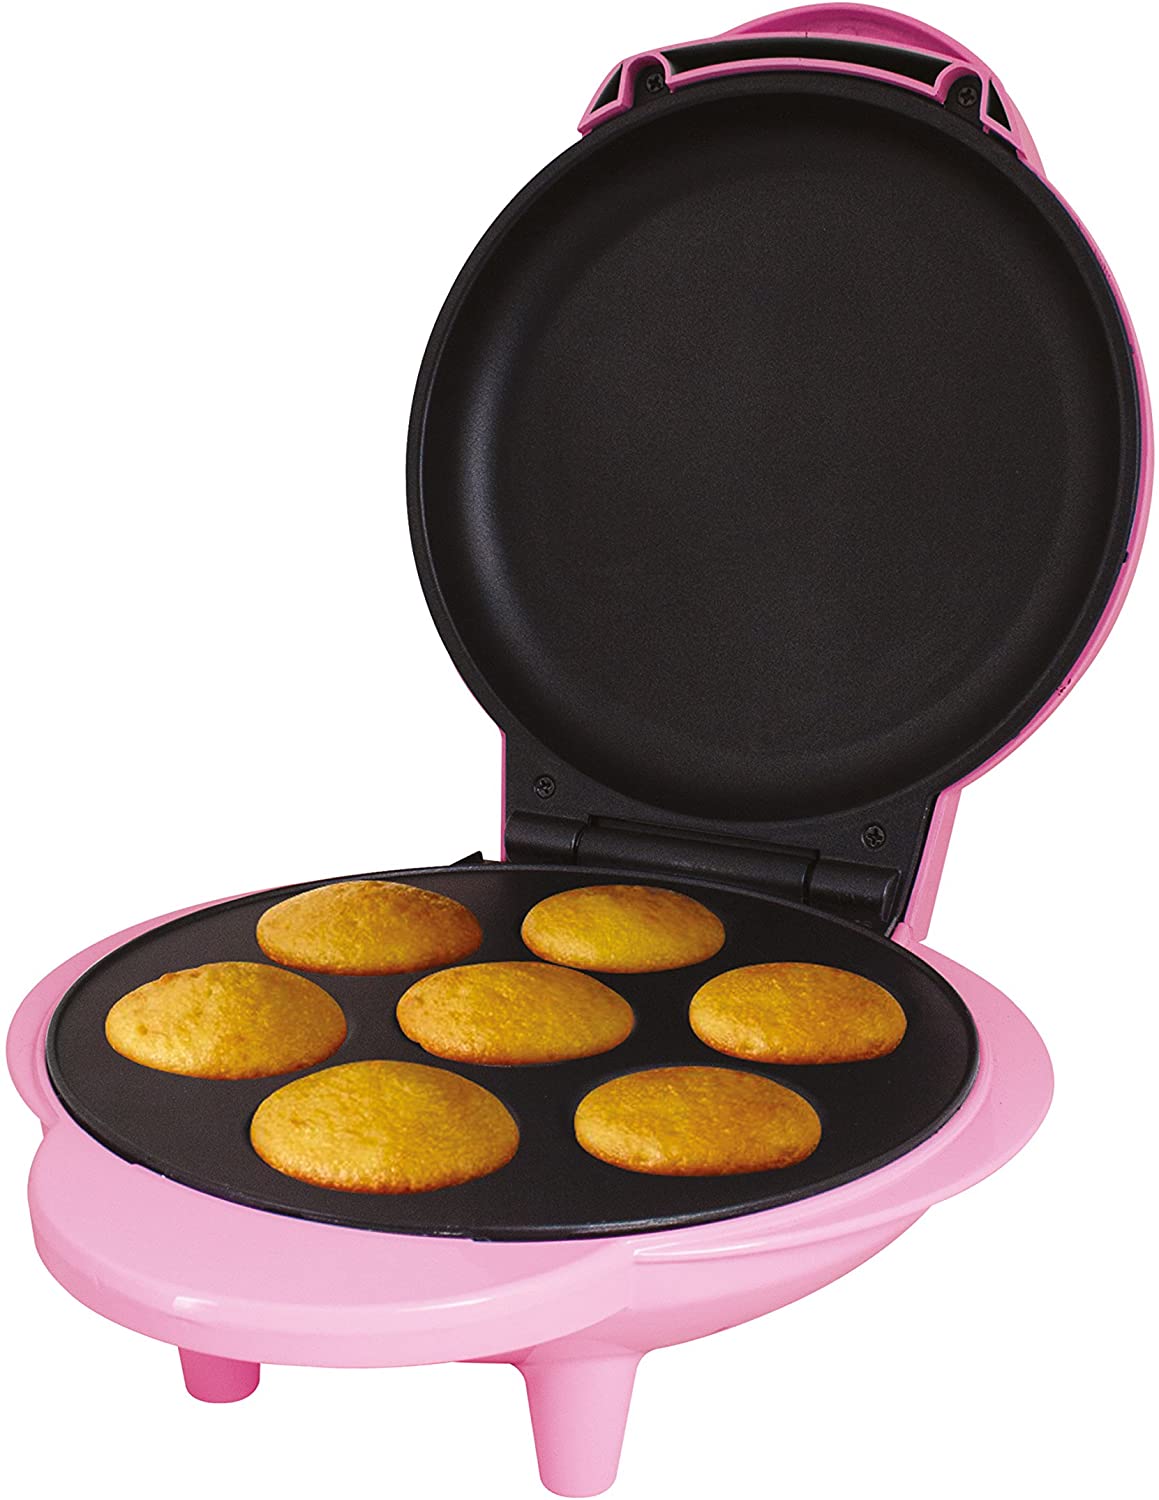 This mini cupcake maker bakes fresh, bite-sized cakes in minutes